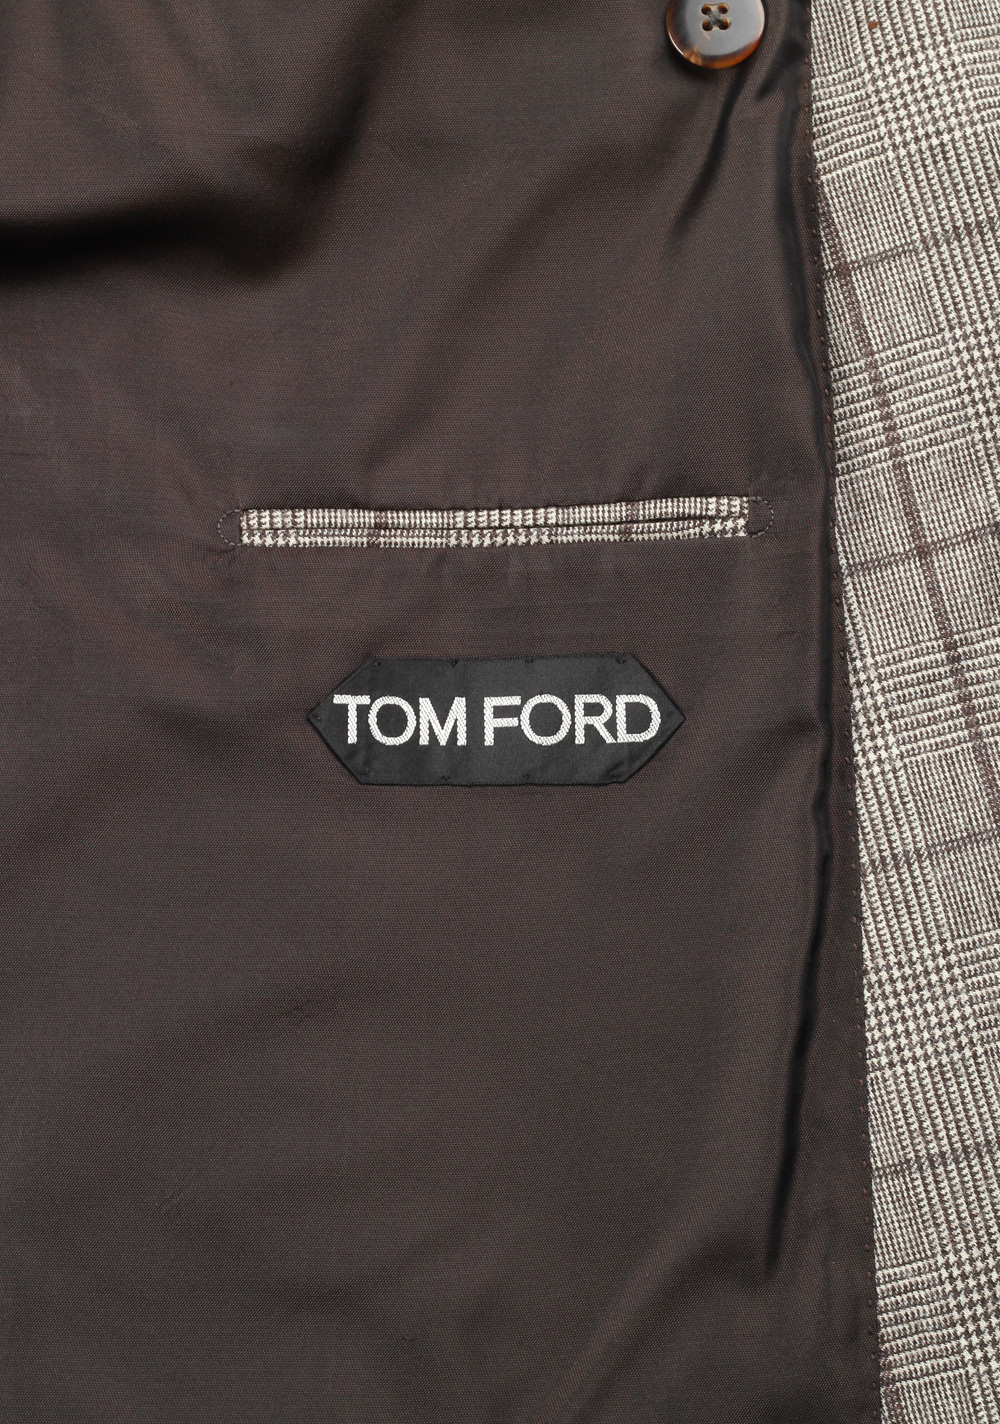 TOM FORD Windsor Double Breasted Sport Coat Size 56 / 46R U.S. Wool ...